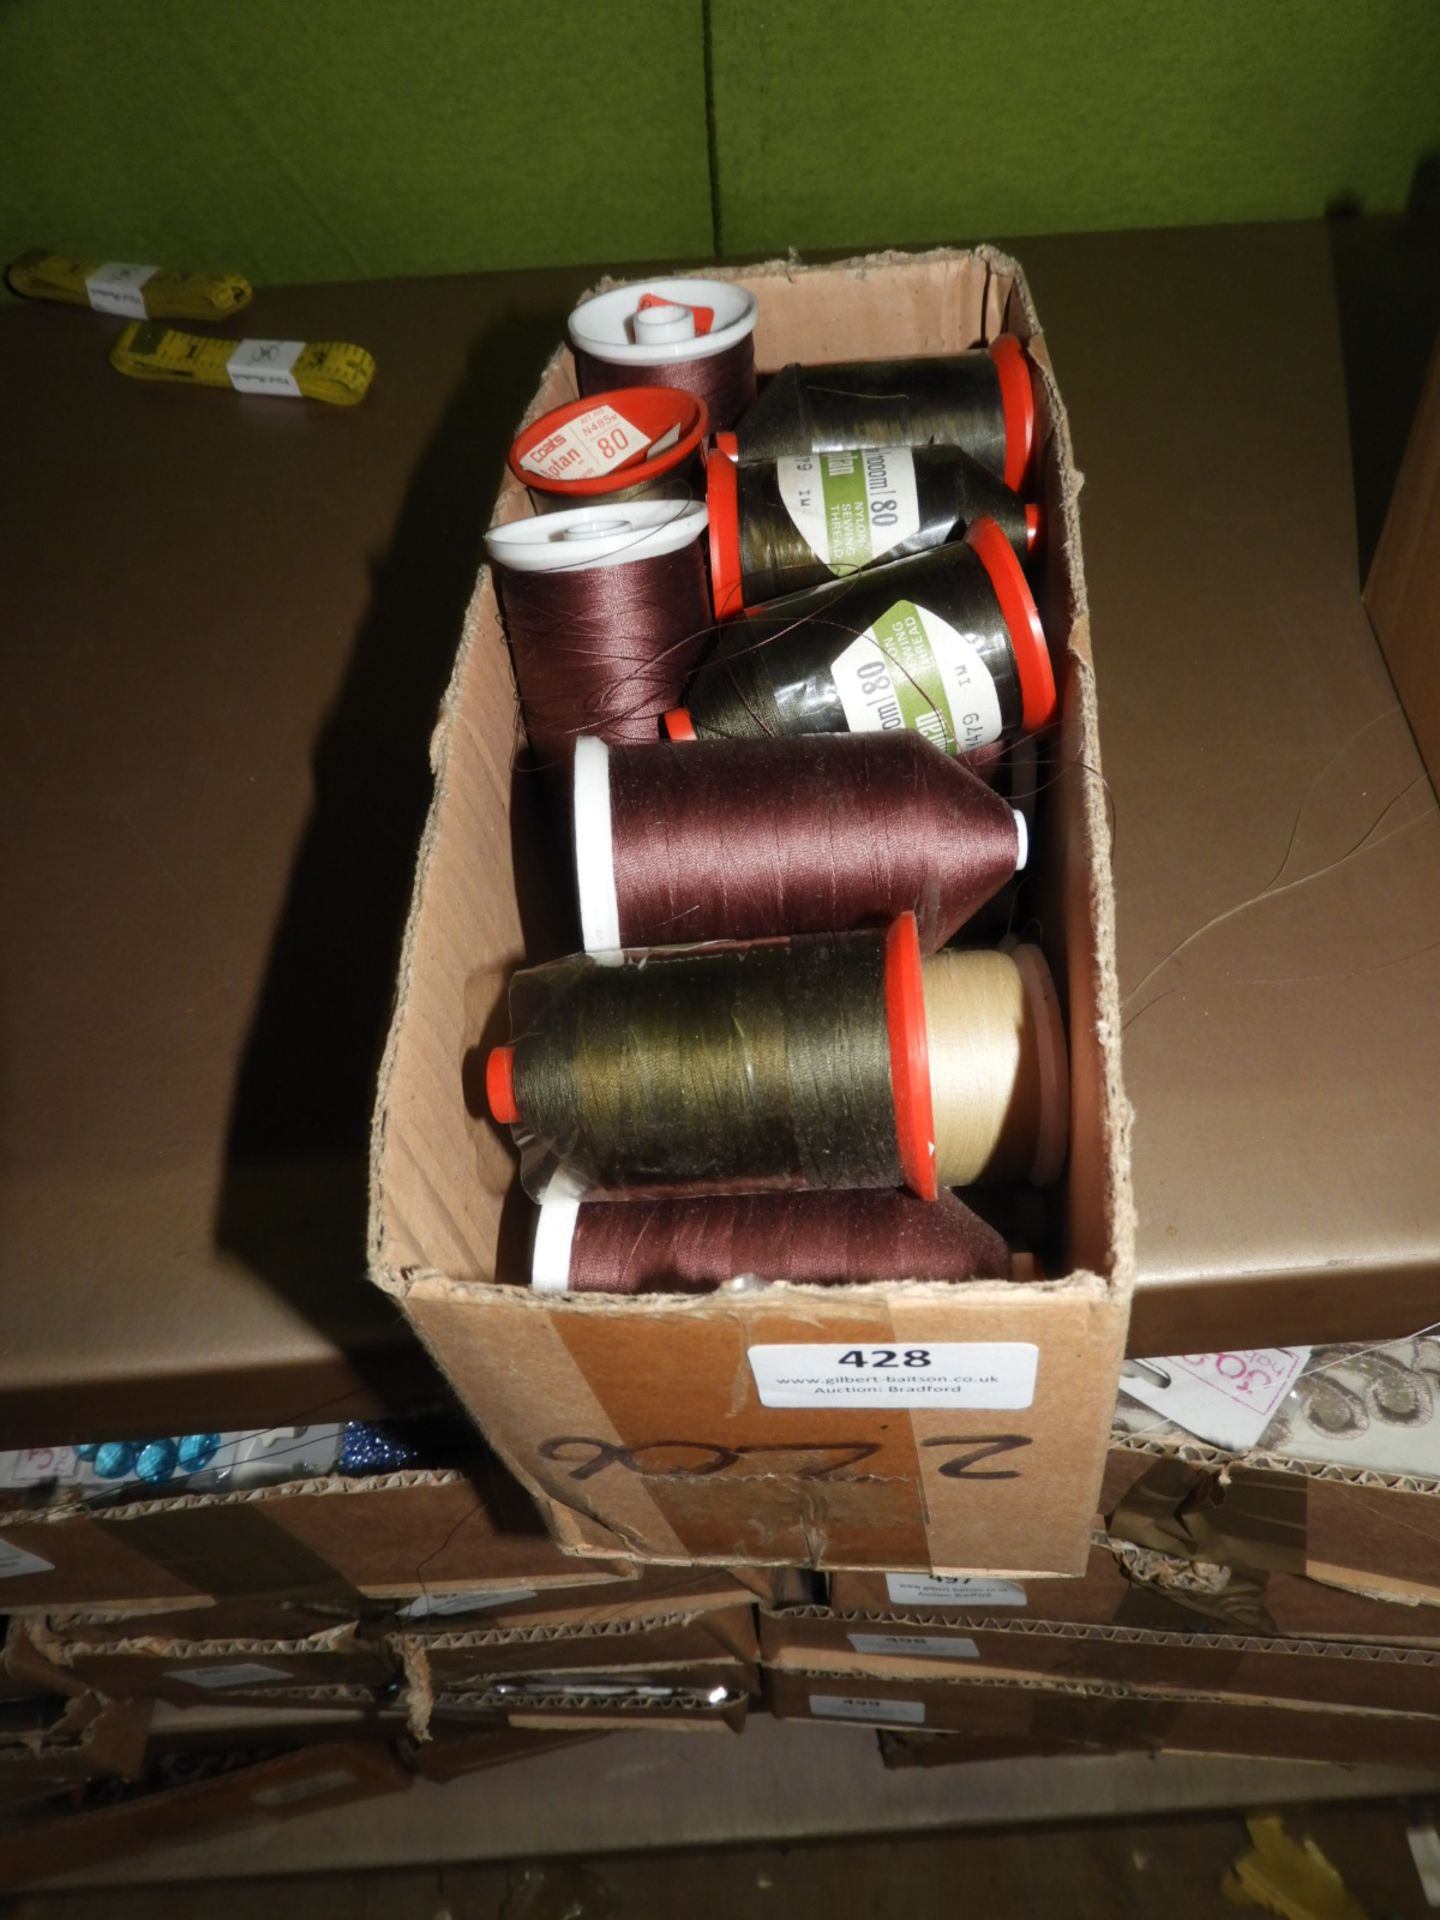 Box Containing 20 Assorted Spools of Thread